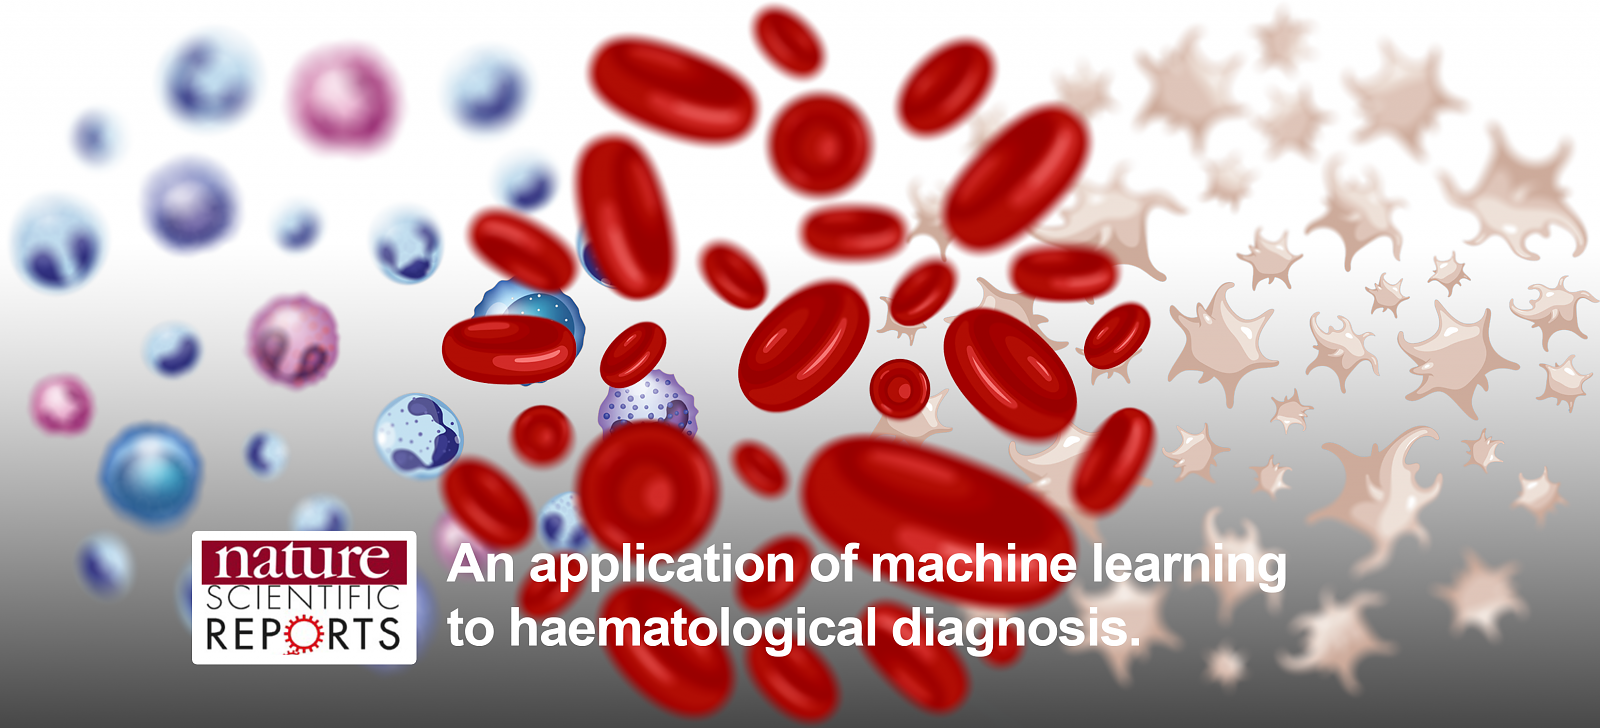 An application of machine learning to haematological diagnosis